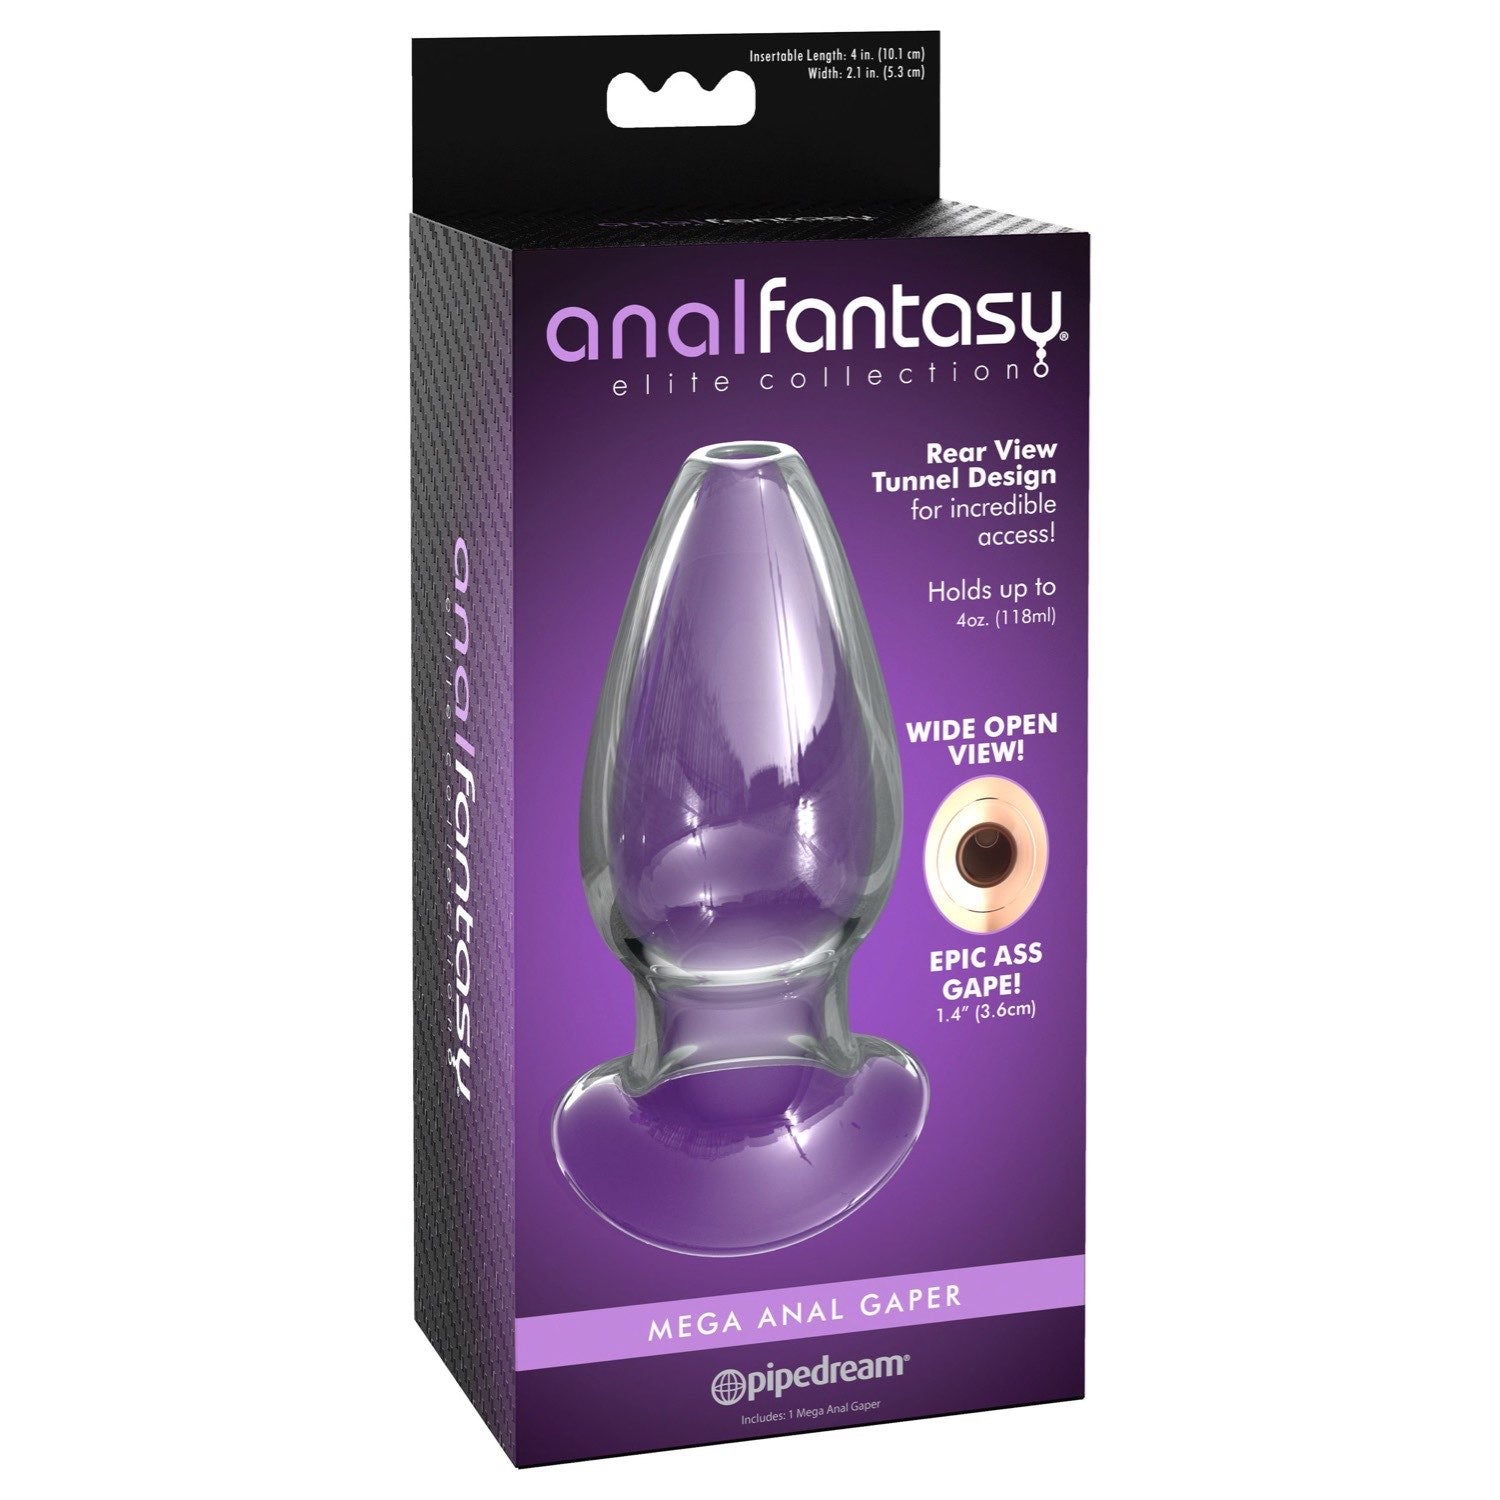 Anal Fantasy Elite Mega Anal Gaper - Clear Glass Hollow Butt Plug by Pipedream